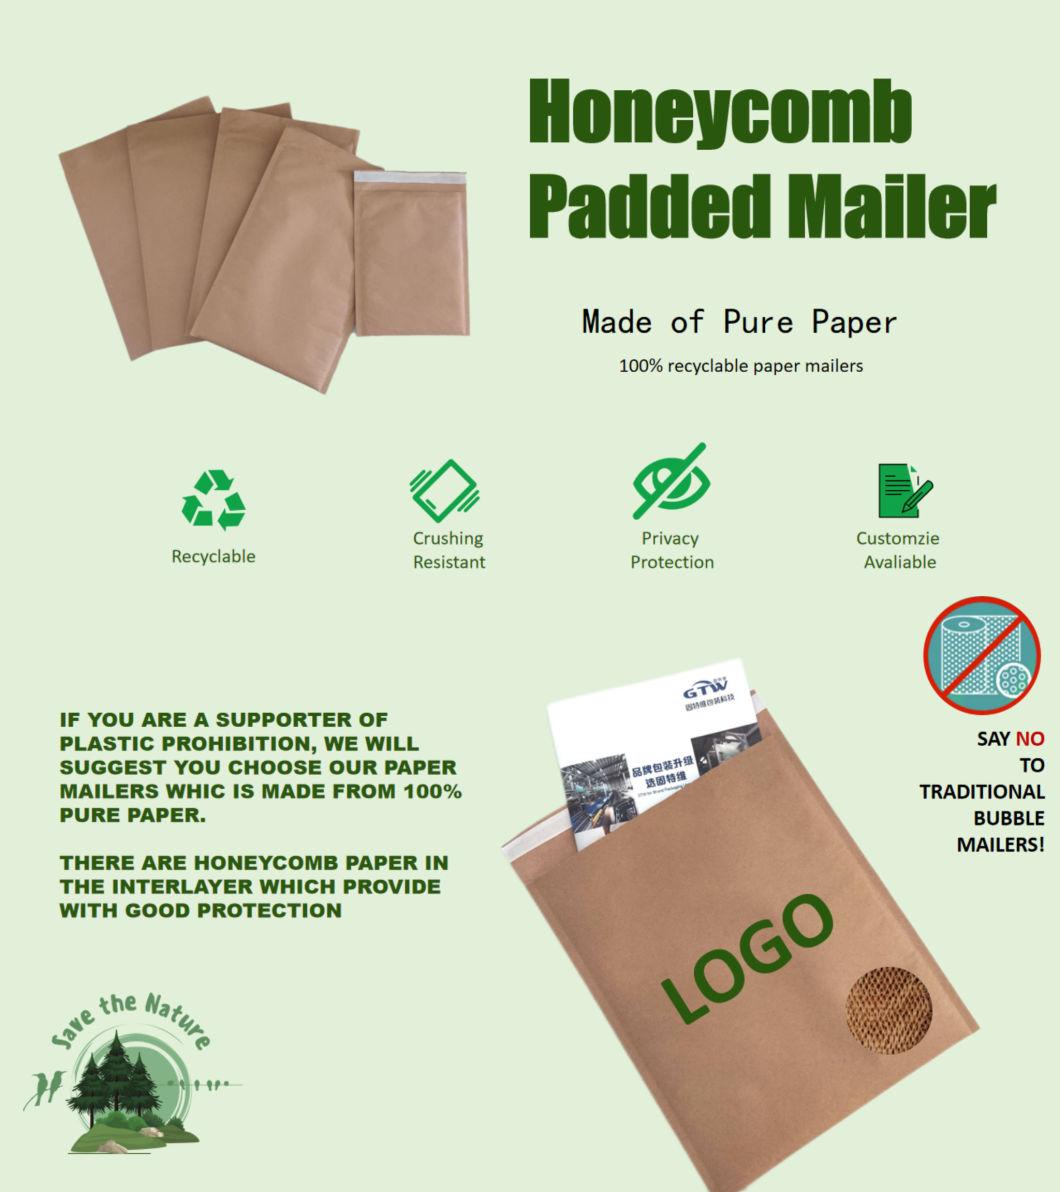 Top One Suppliers Packaging Cushion Recycled Envelope Honeycomb Paper Kraft Paper Mailers